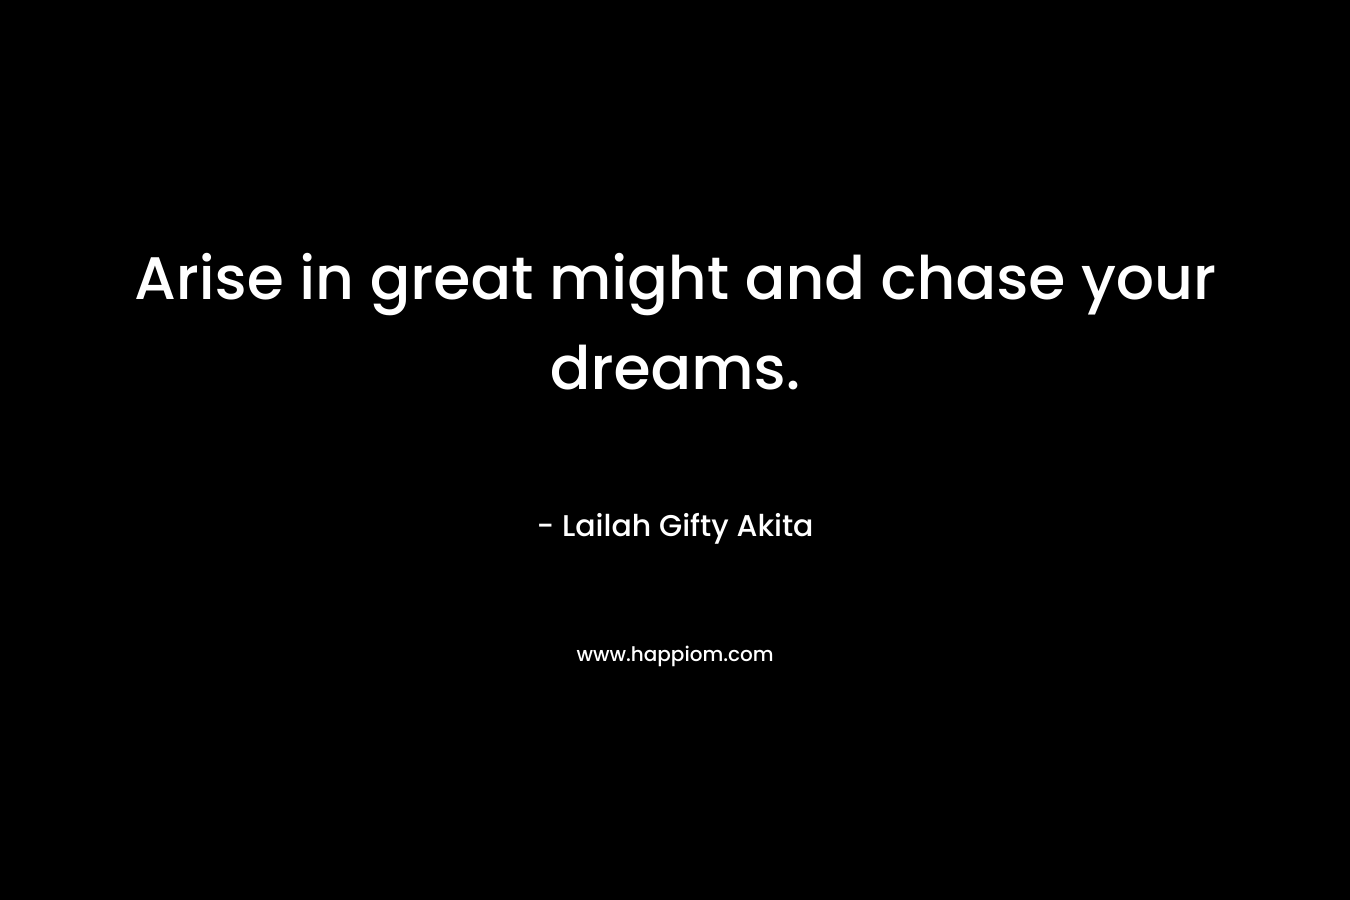 Arise in great might and chase your dreams.